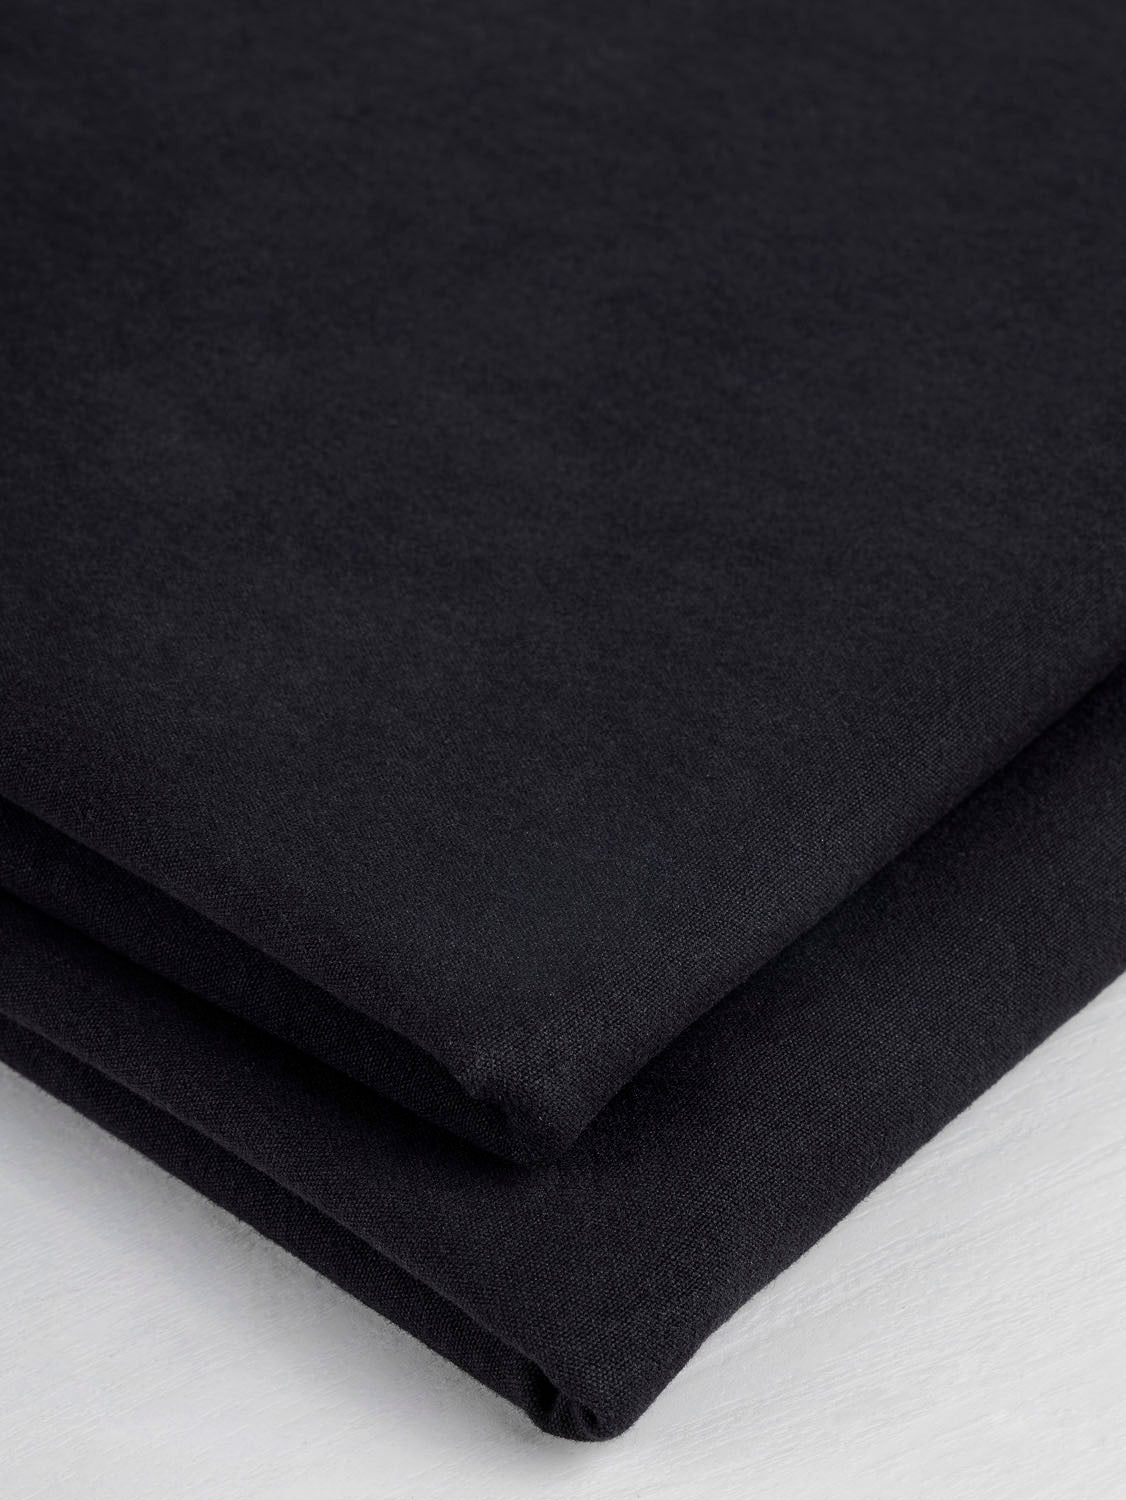 Substantial Organic Cotton Broadcloth - Black